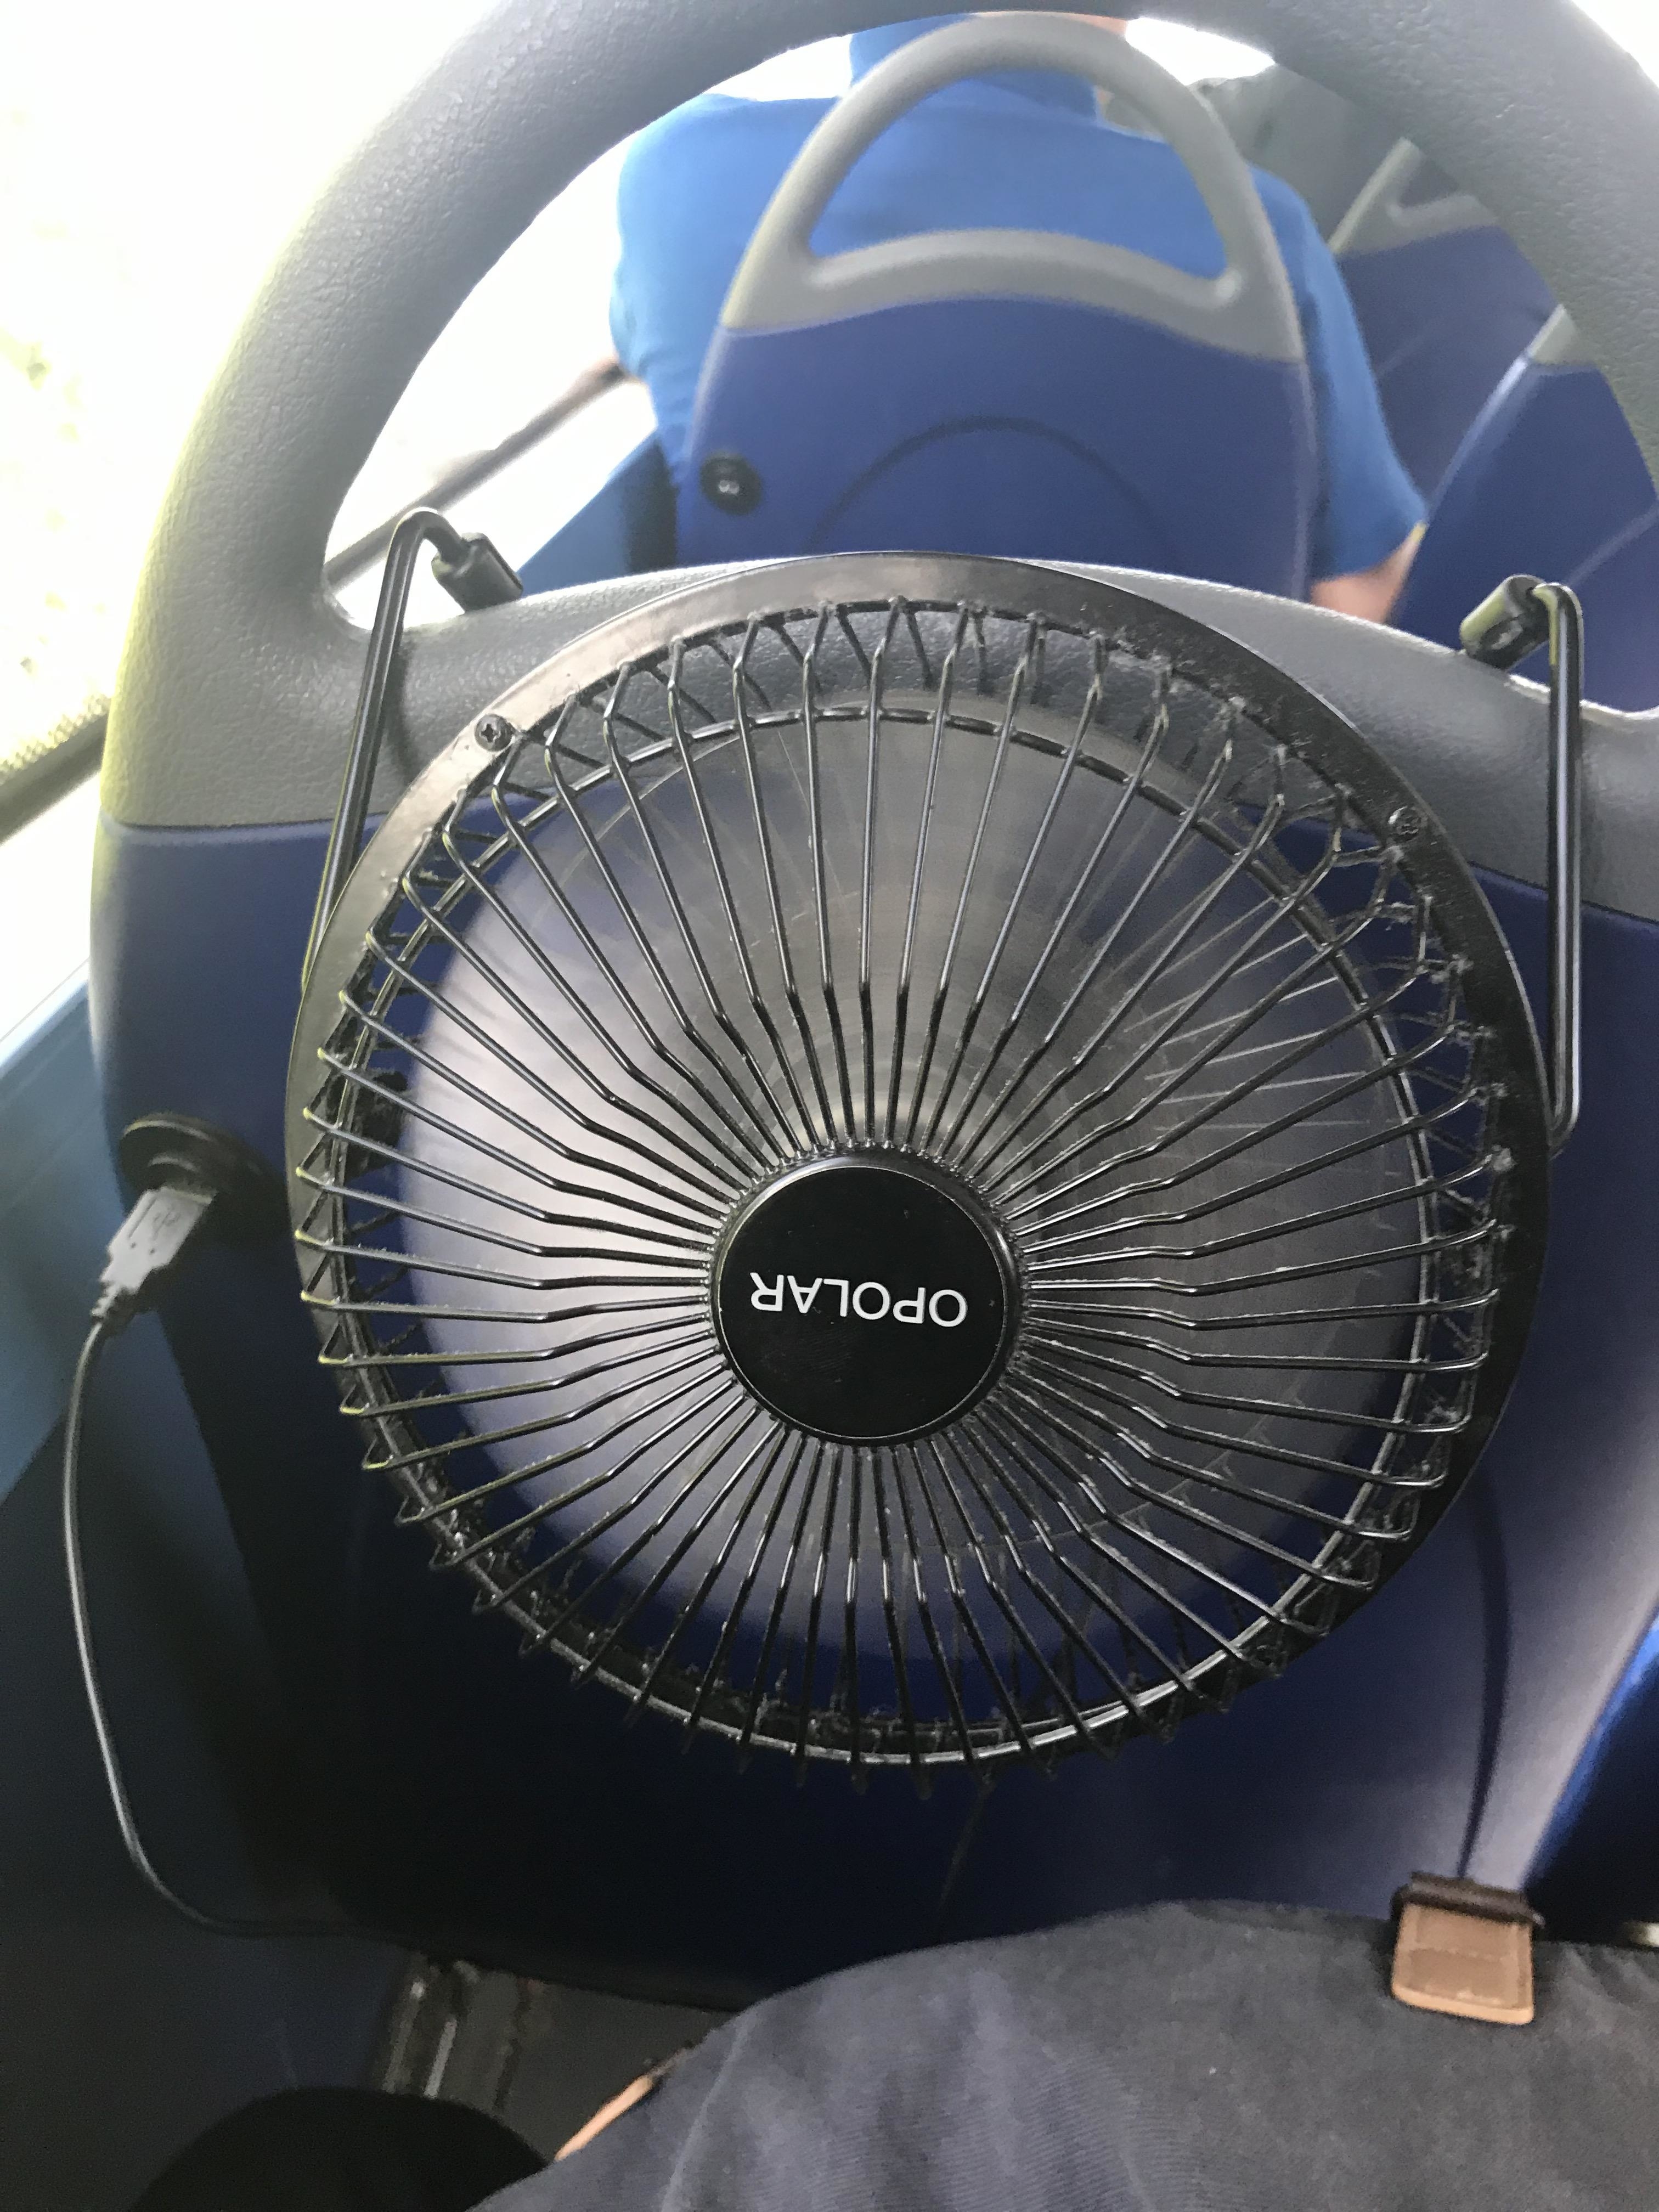 A USB fan hanging on the seat of a bus